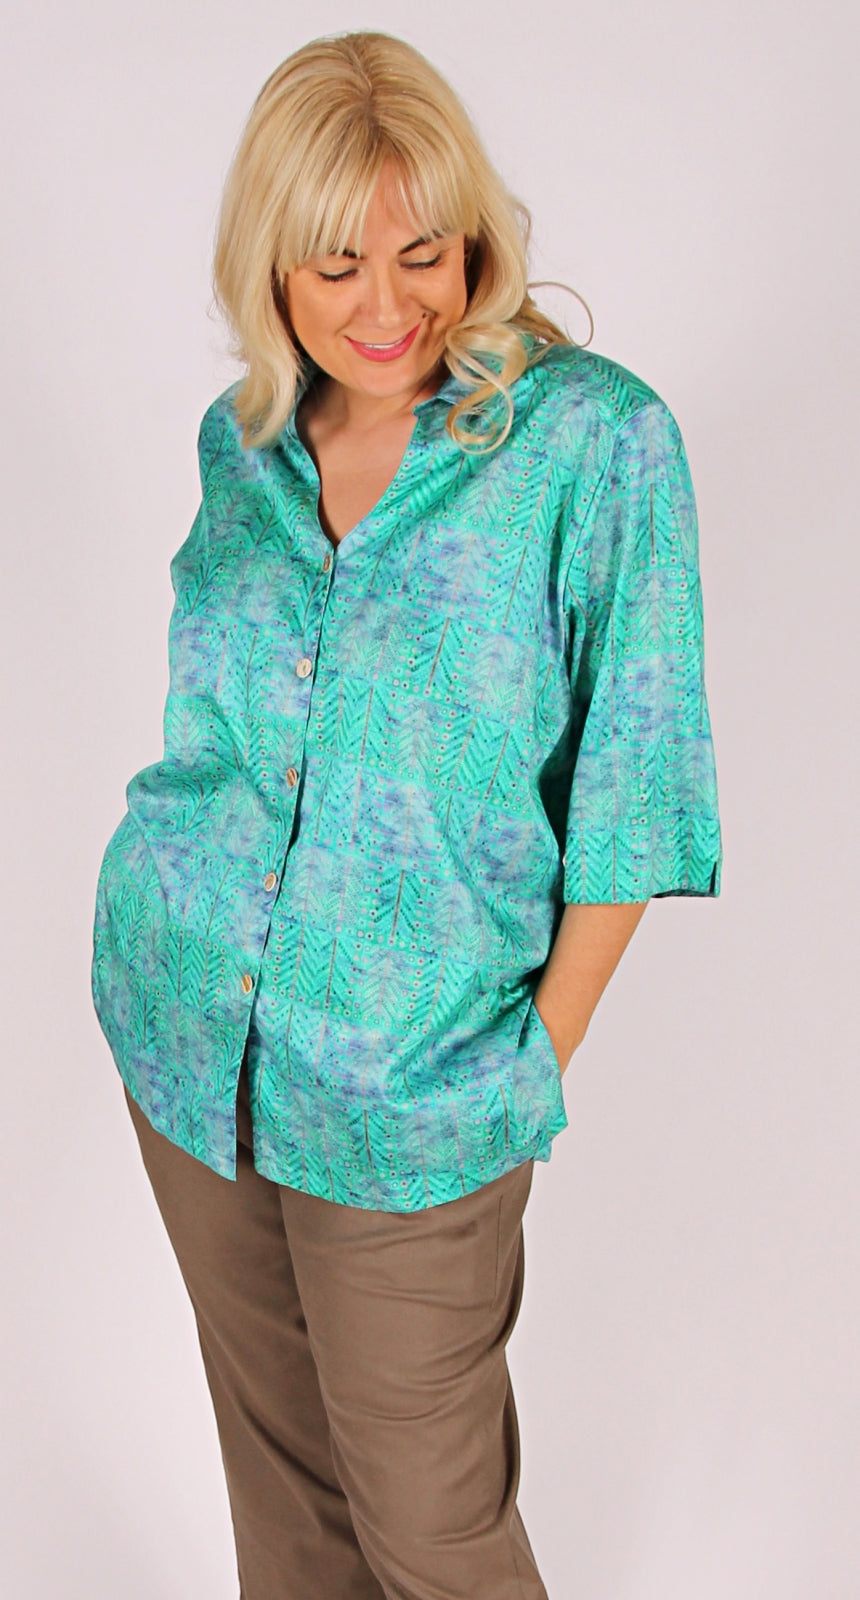 Swiss Cotton Shaped Neck Blouse Teal